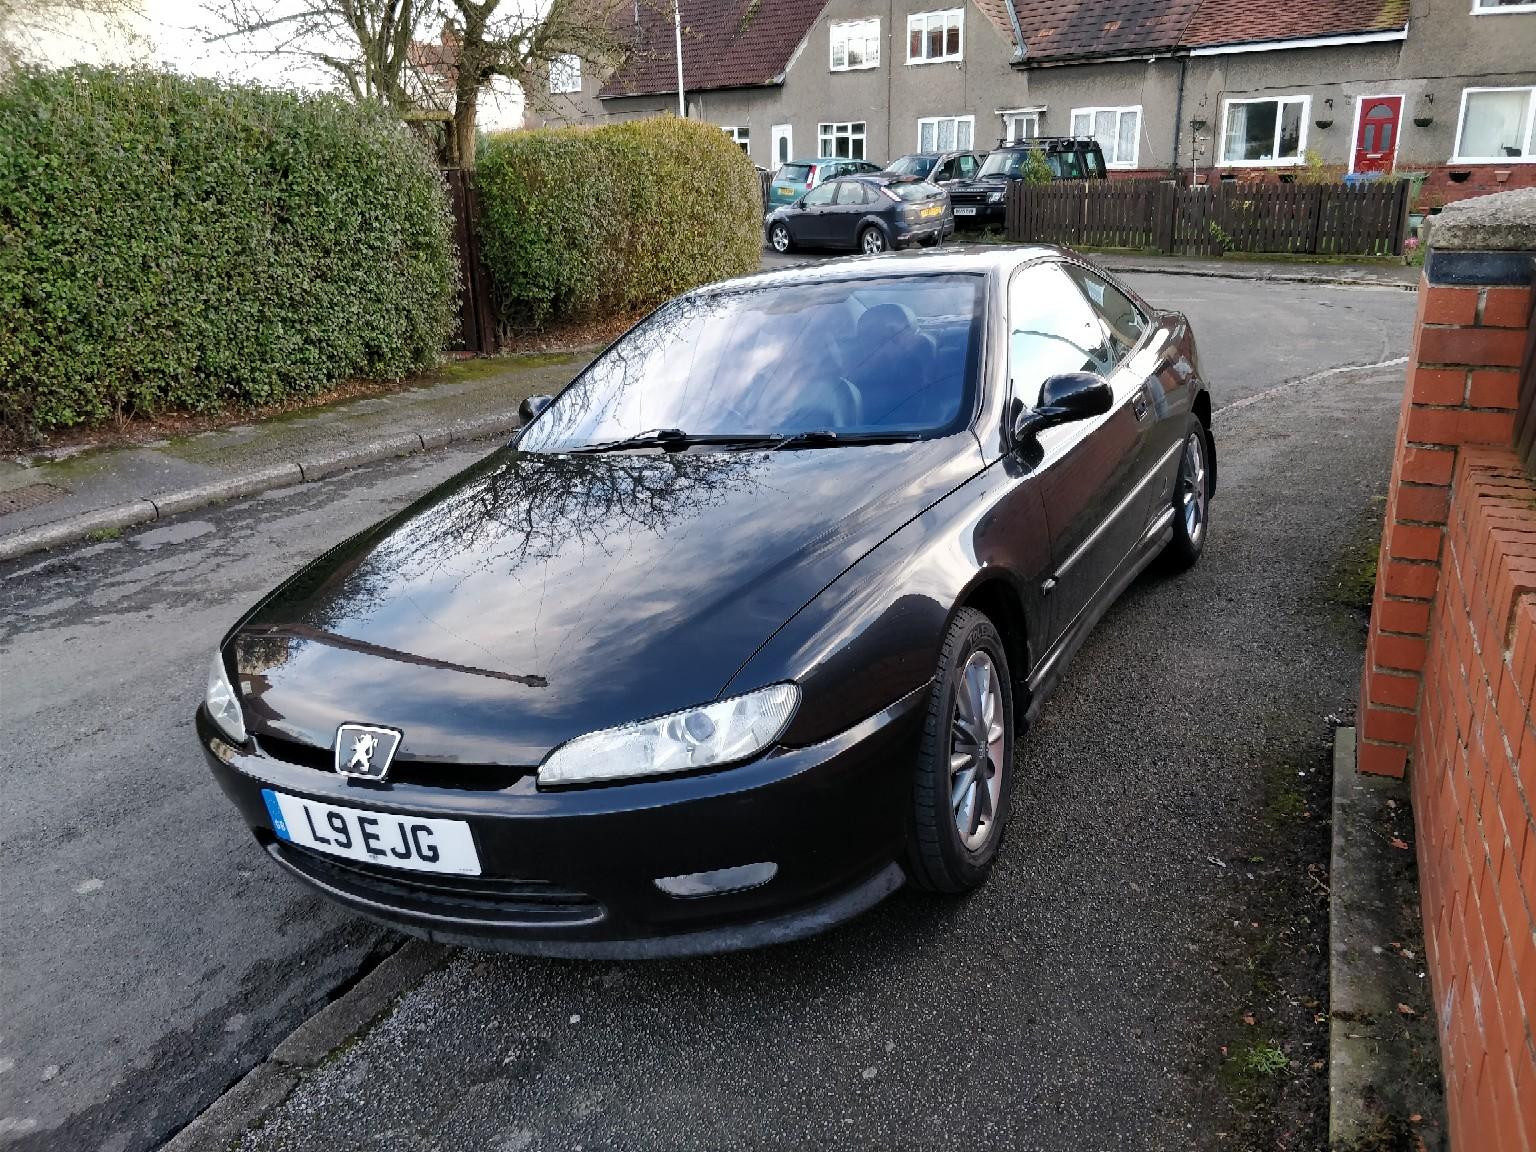 Peugeot 406 coupe in S80 Bassetlaw for 163 750 00 for sale Shpock